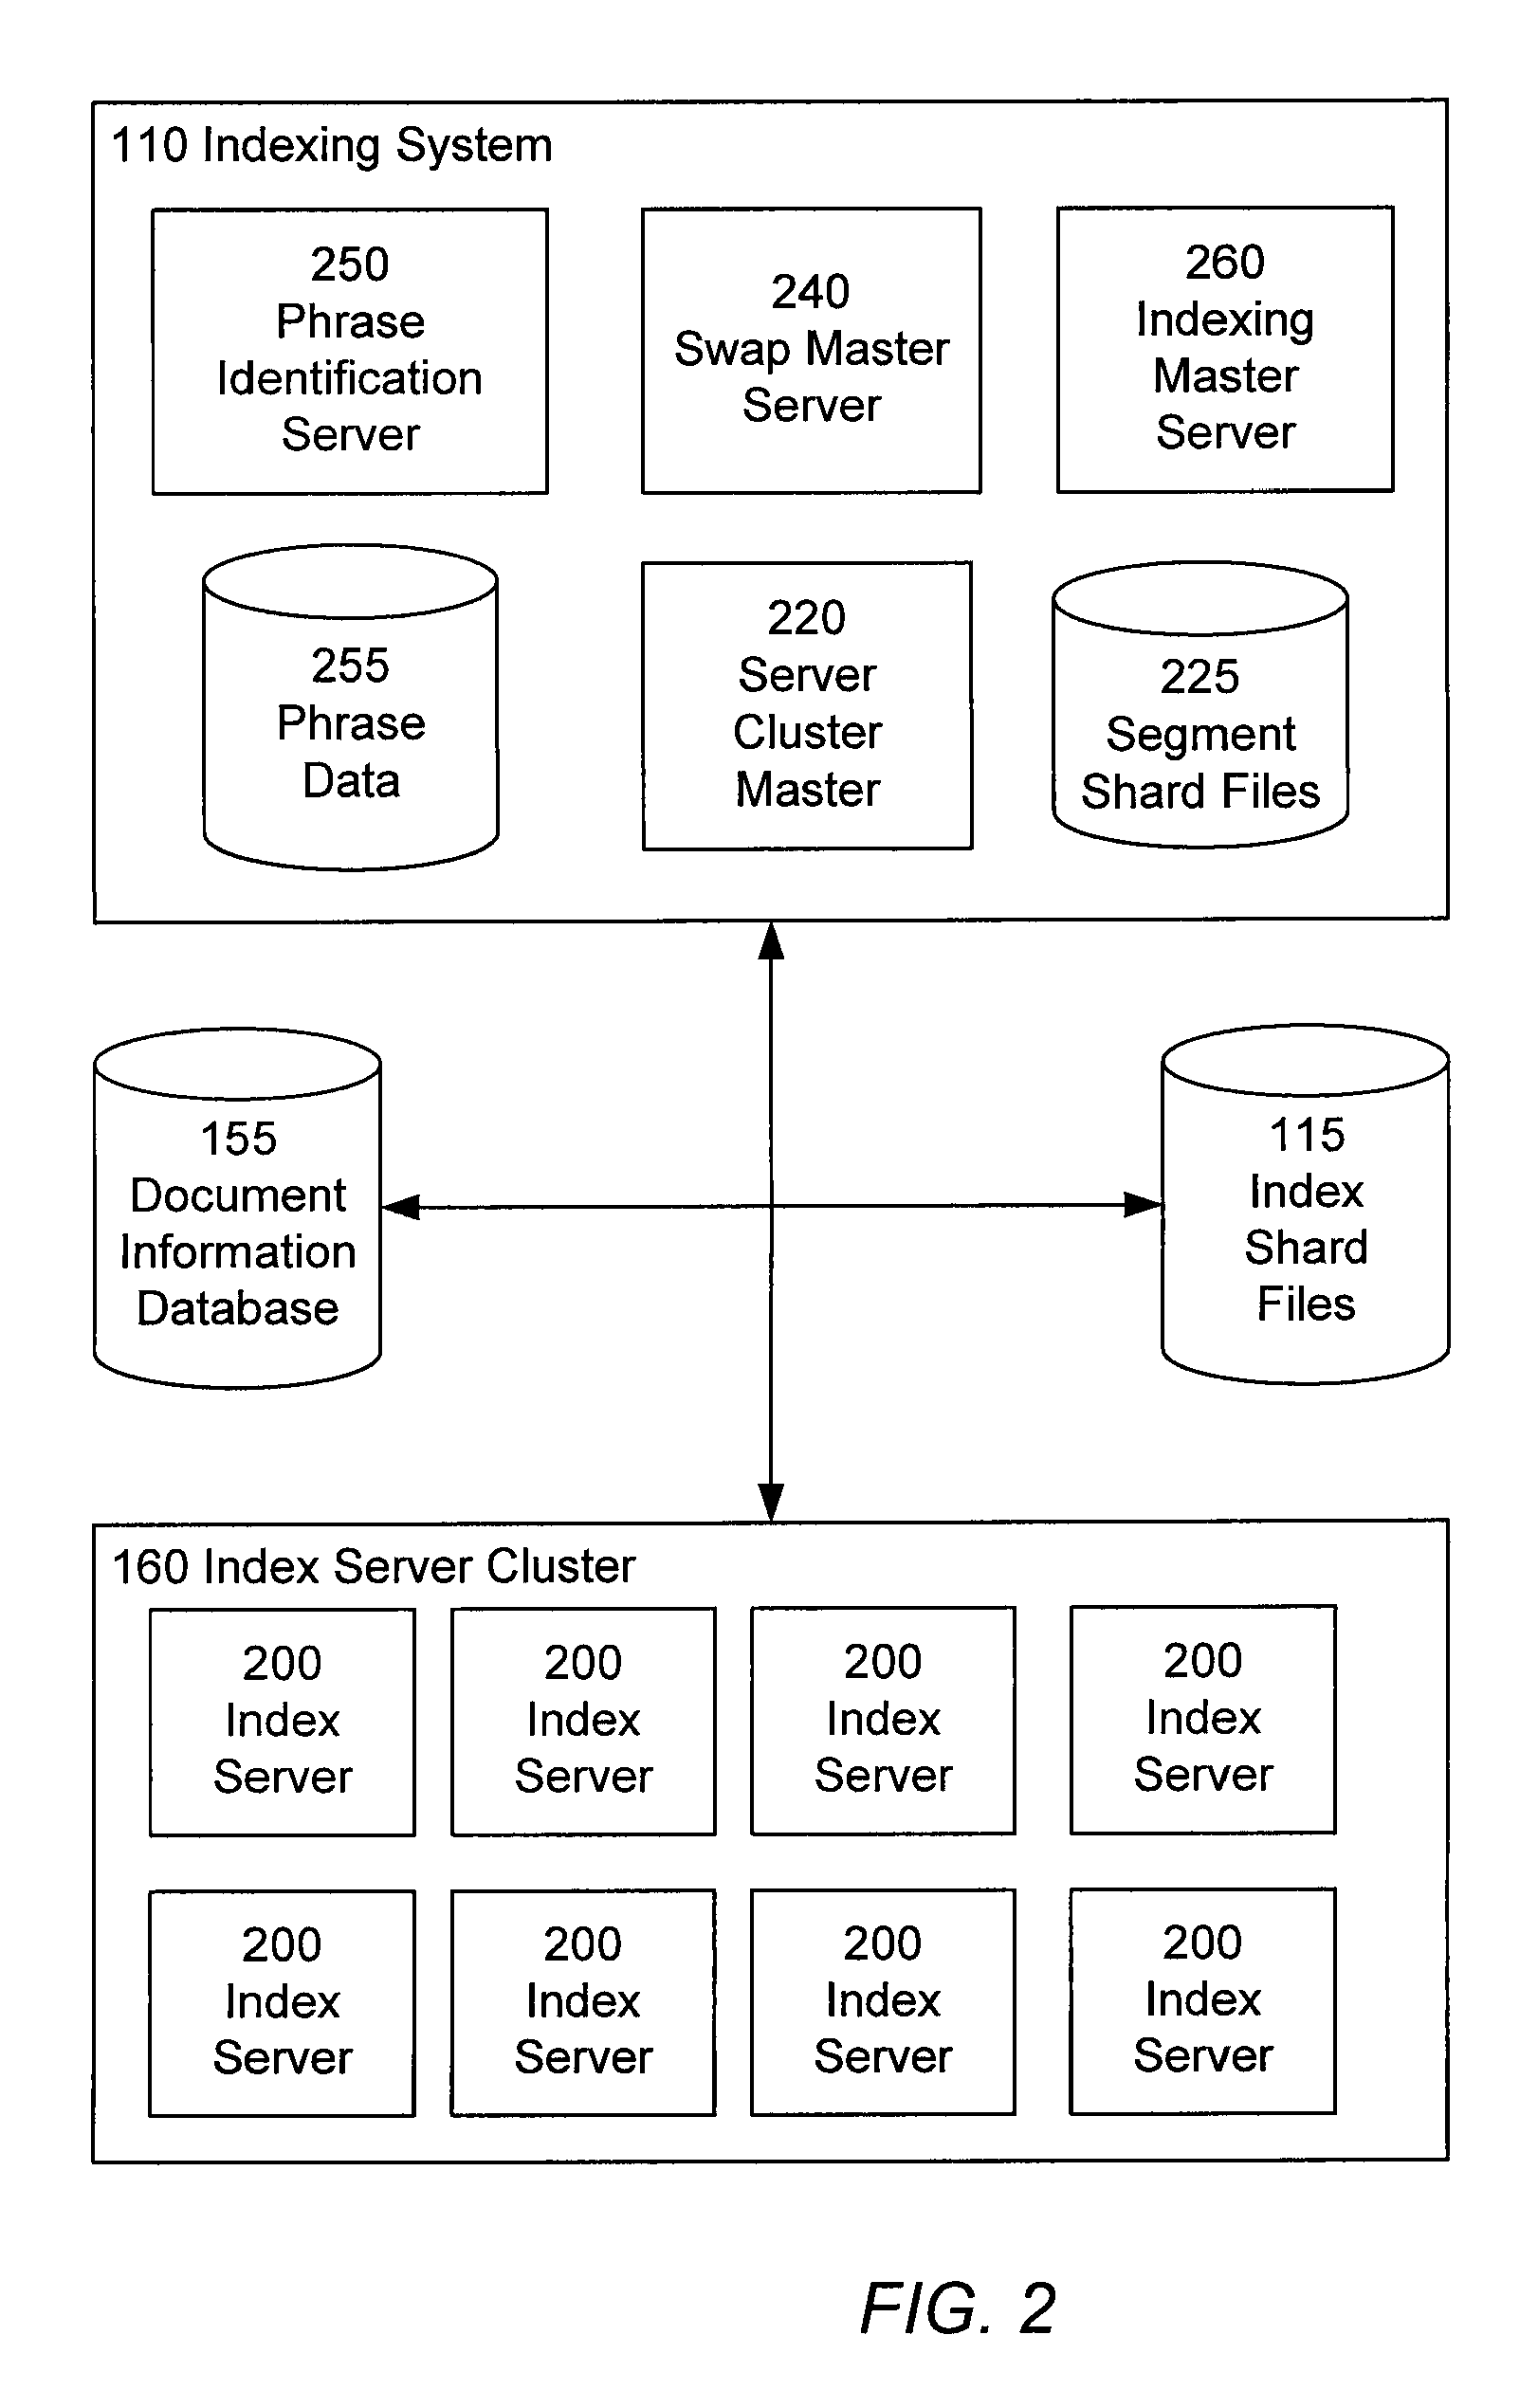 Index updating using segment swapping